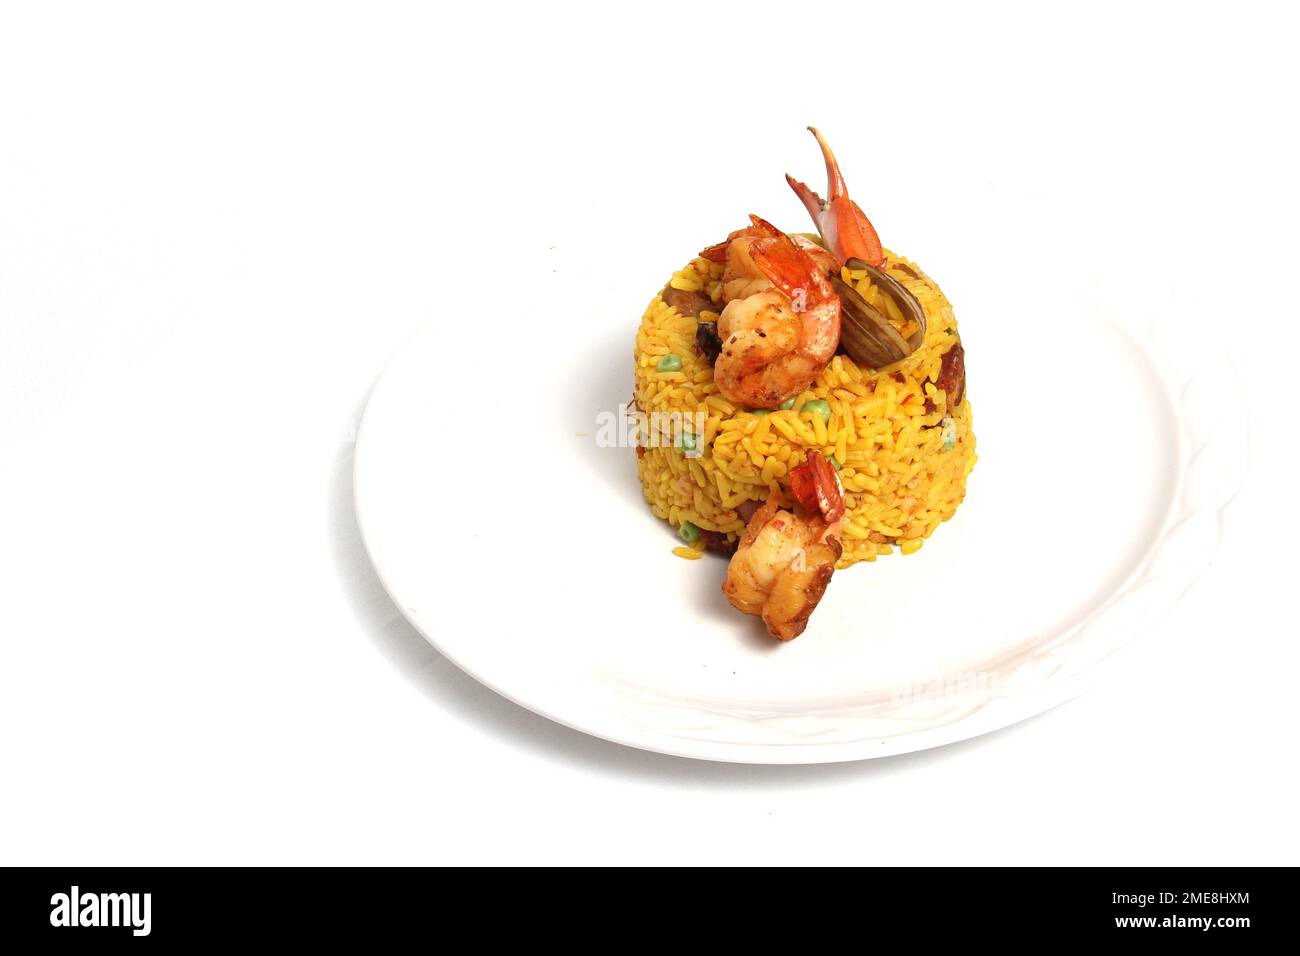 Paella rice is a traditional cuisine recipe from the city of Valencia Spain prepared with saffron, seafood, shrimp, vegetables served on a white plate Stock Photo